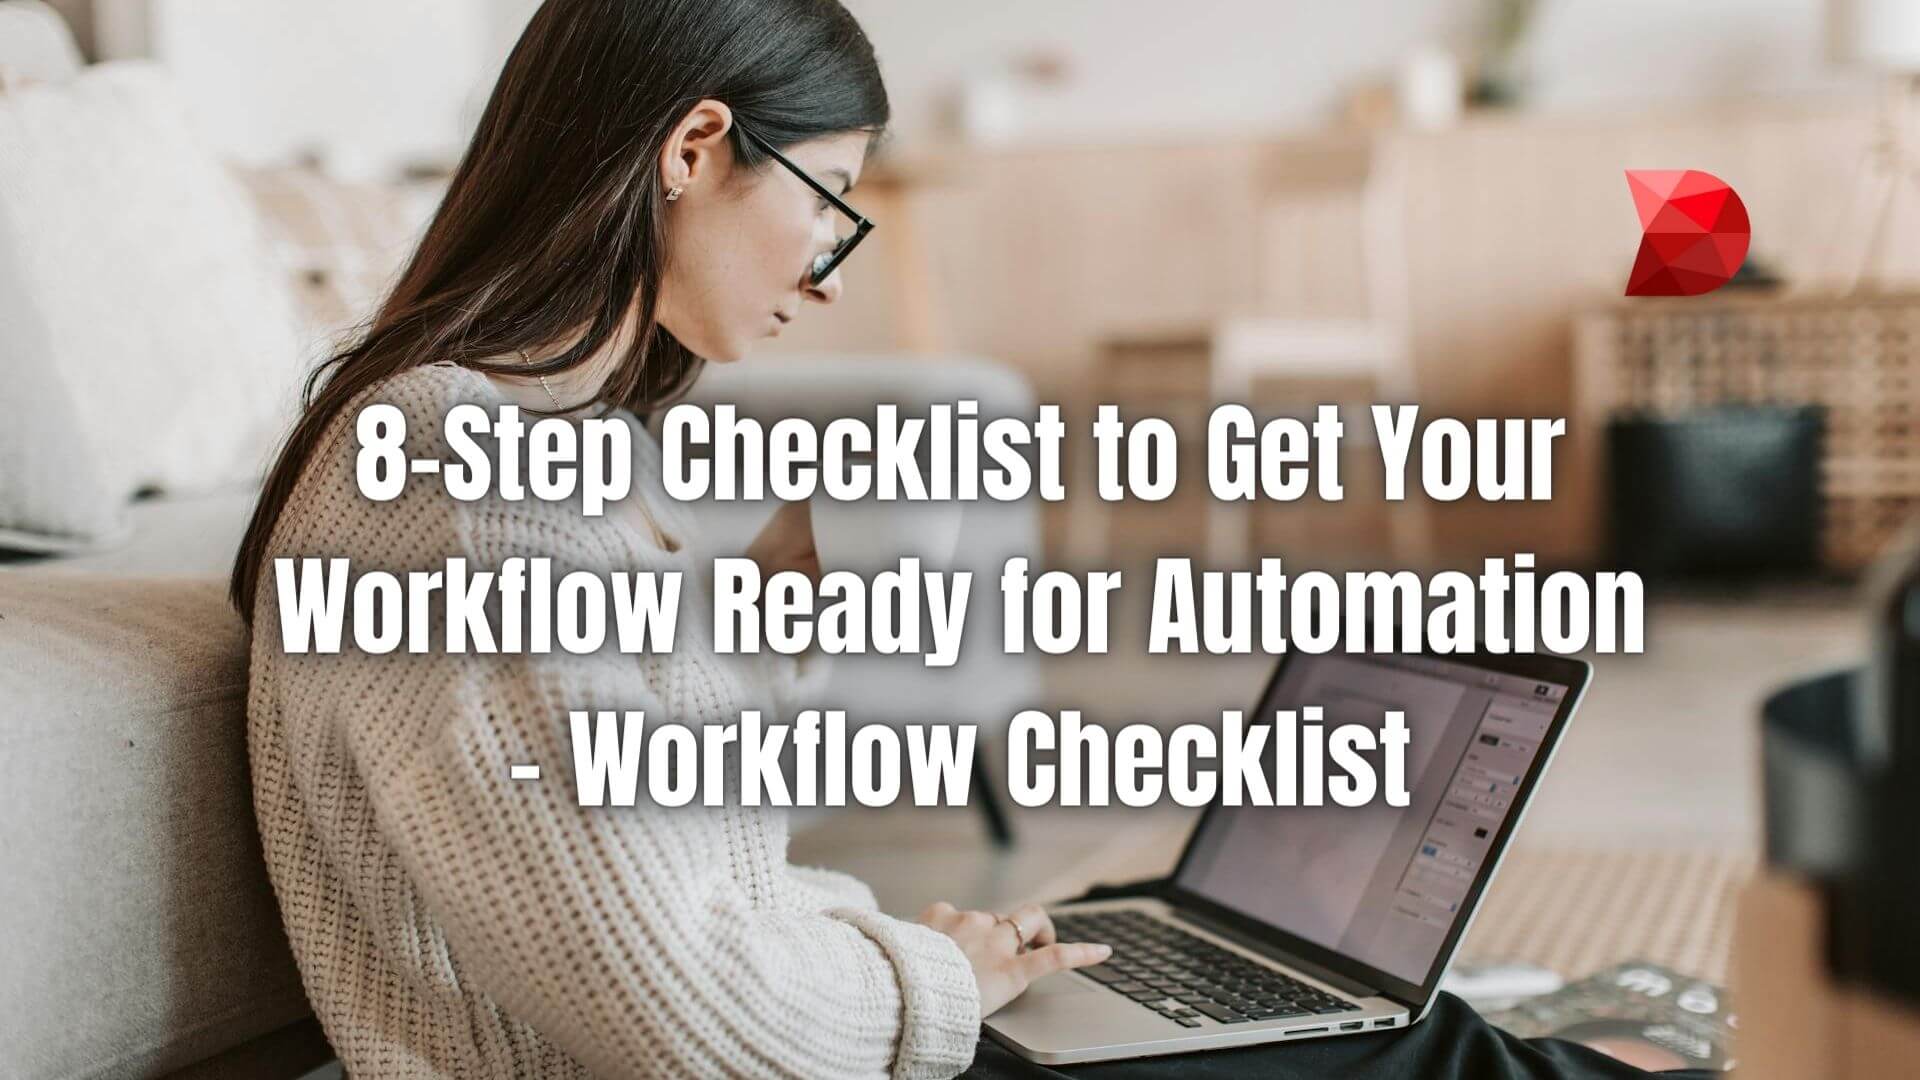 Optimize efficiency and minimize manual tasks! Click here to learn how to prepare your workflow for automation with just an 8-step checklist.